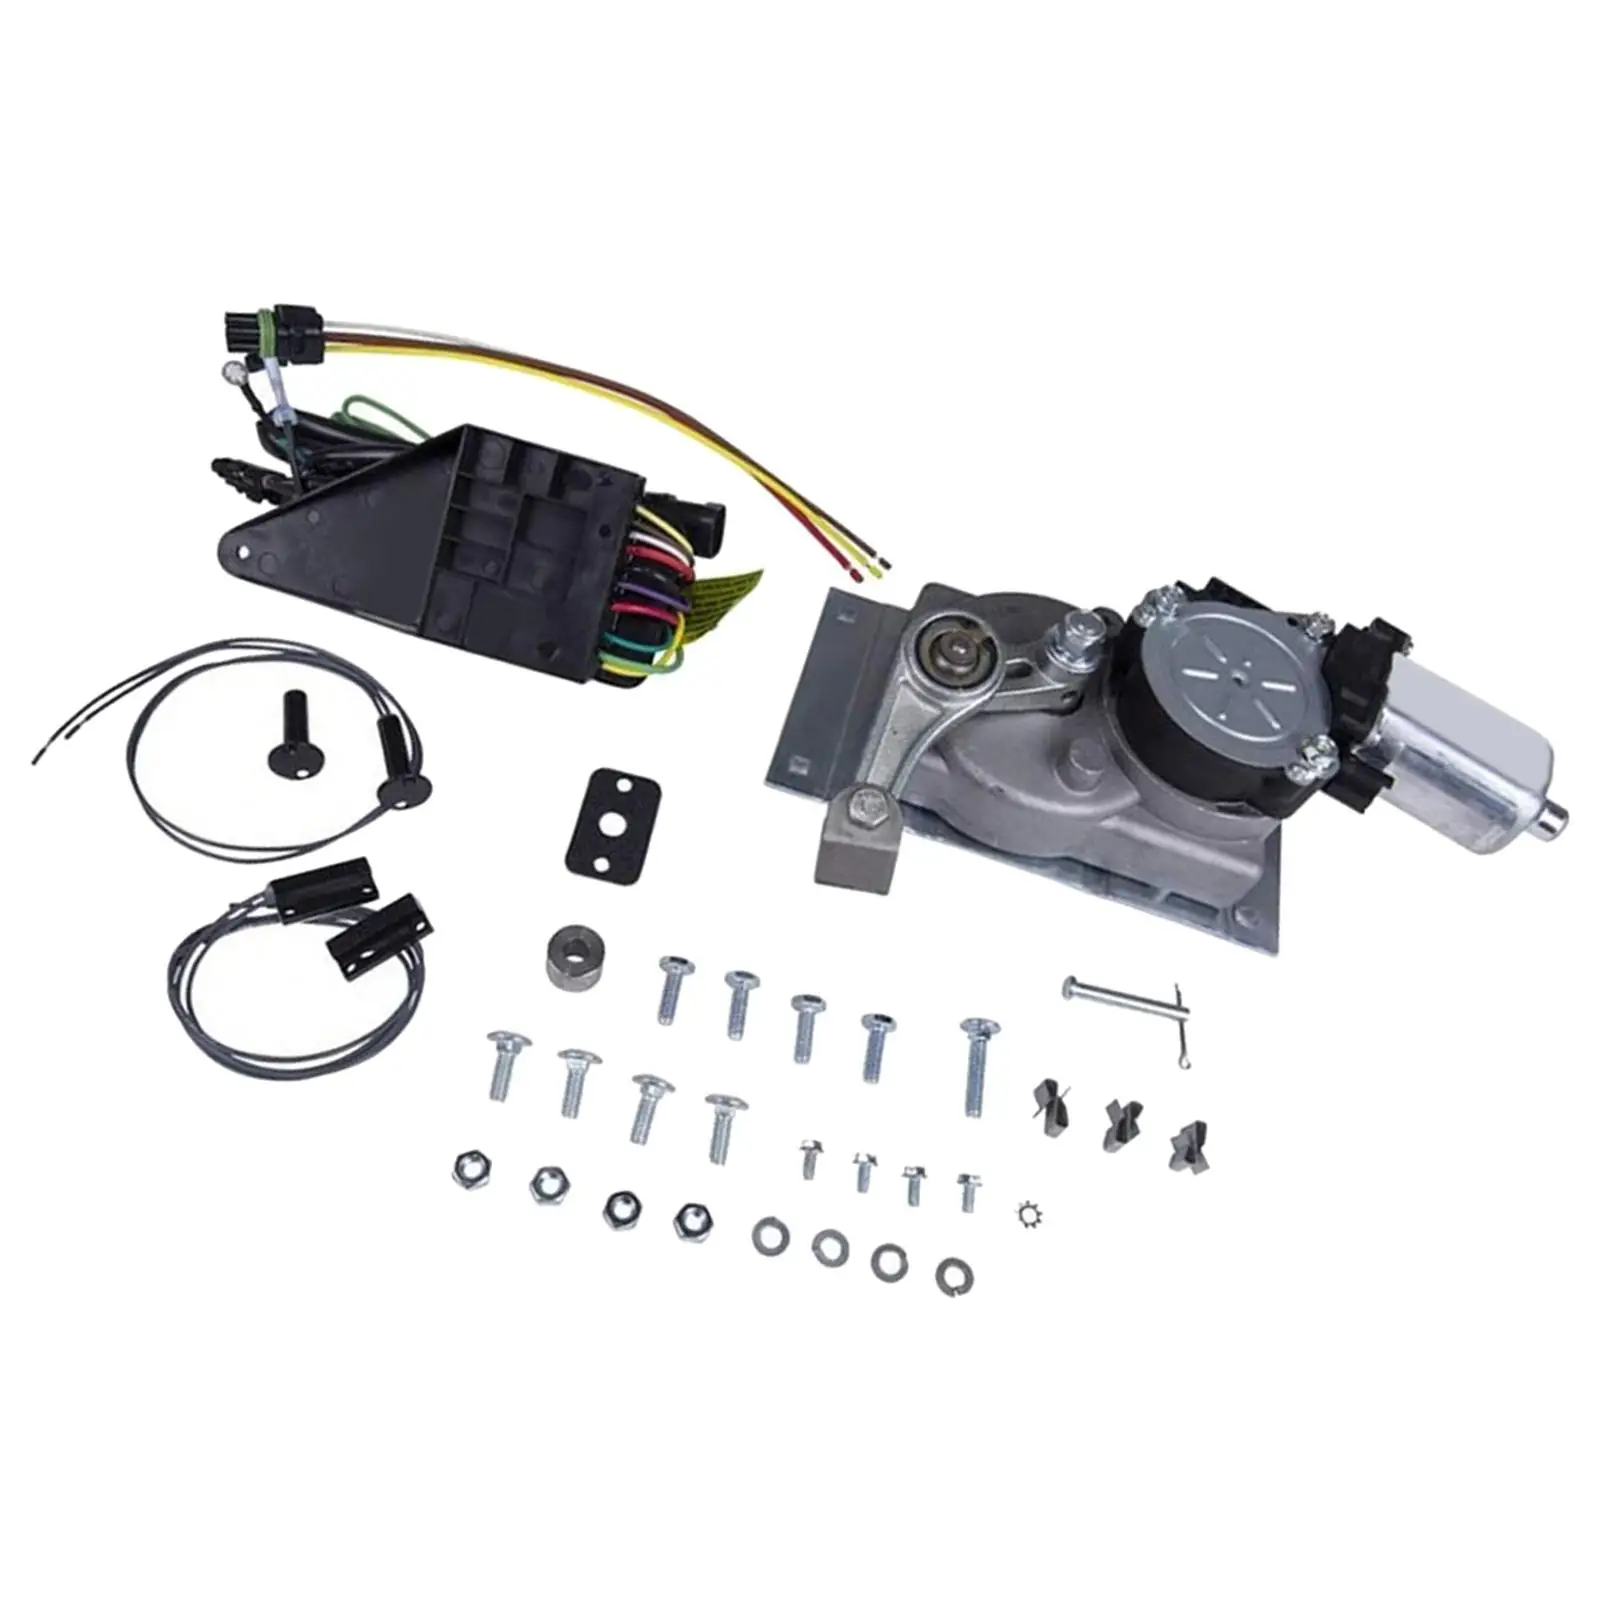 RV Trailer Step Motor Conversion Kit Metal 379146 for B Linkage Transport Vehicle Easy to Mount Modification Assembly